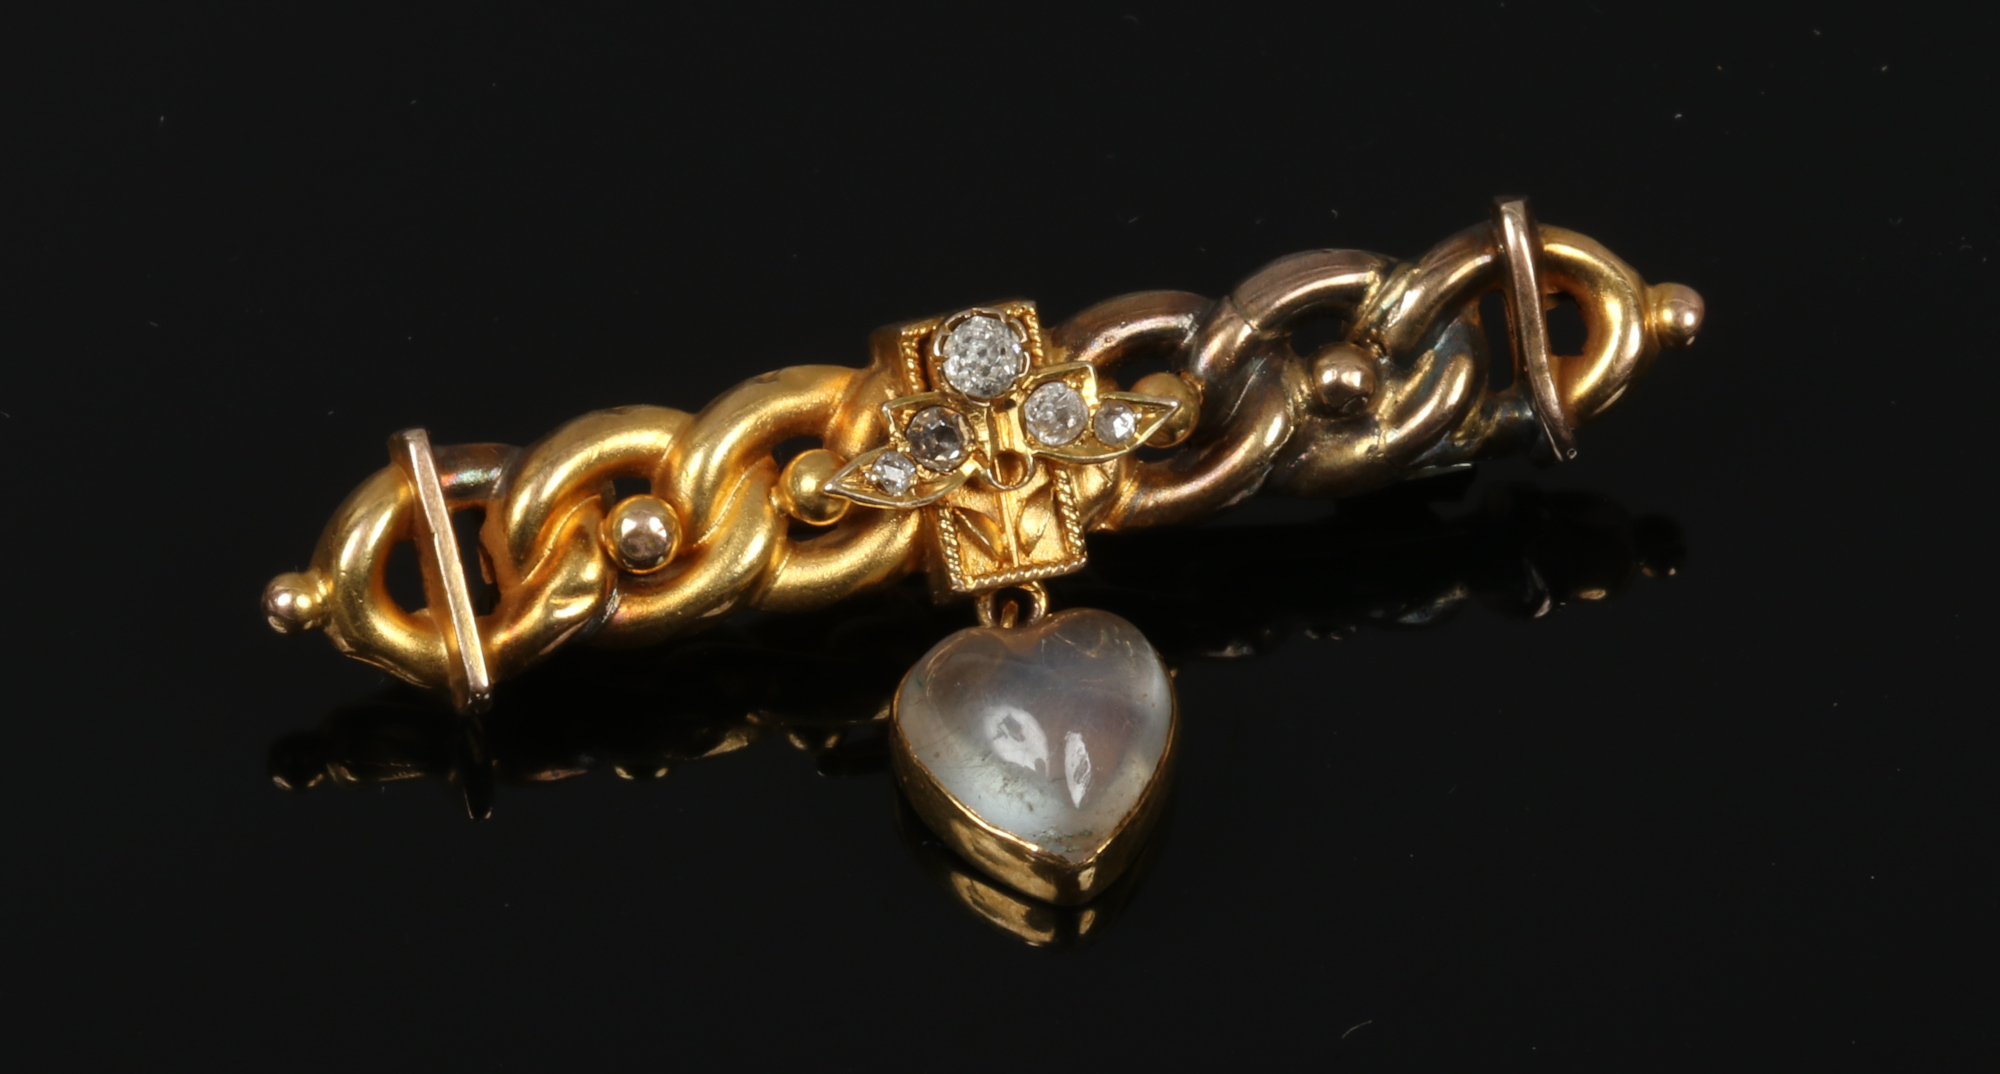 An 18ct gold bar brooch set with diamonds and heart shaped moonstone pendant.